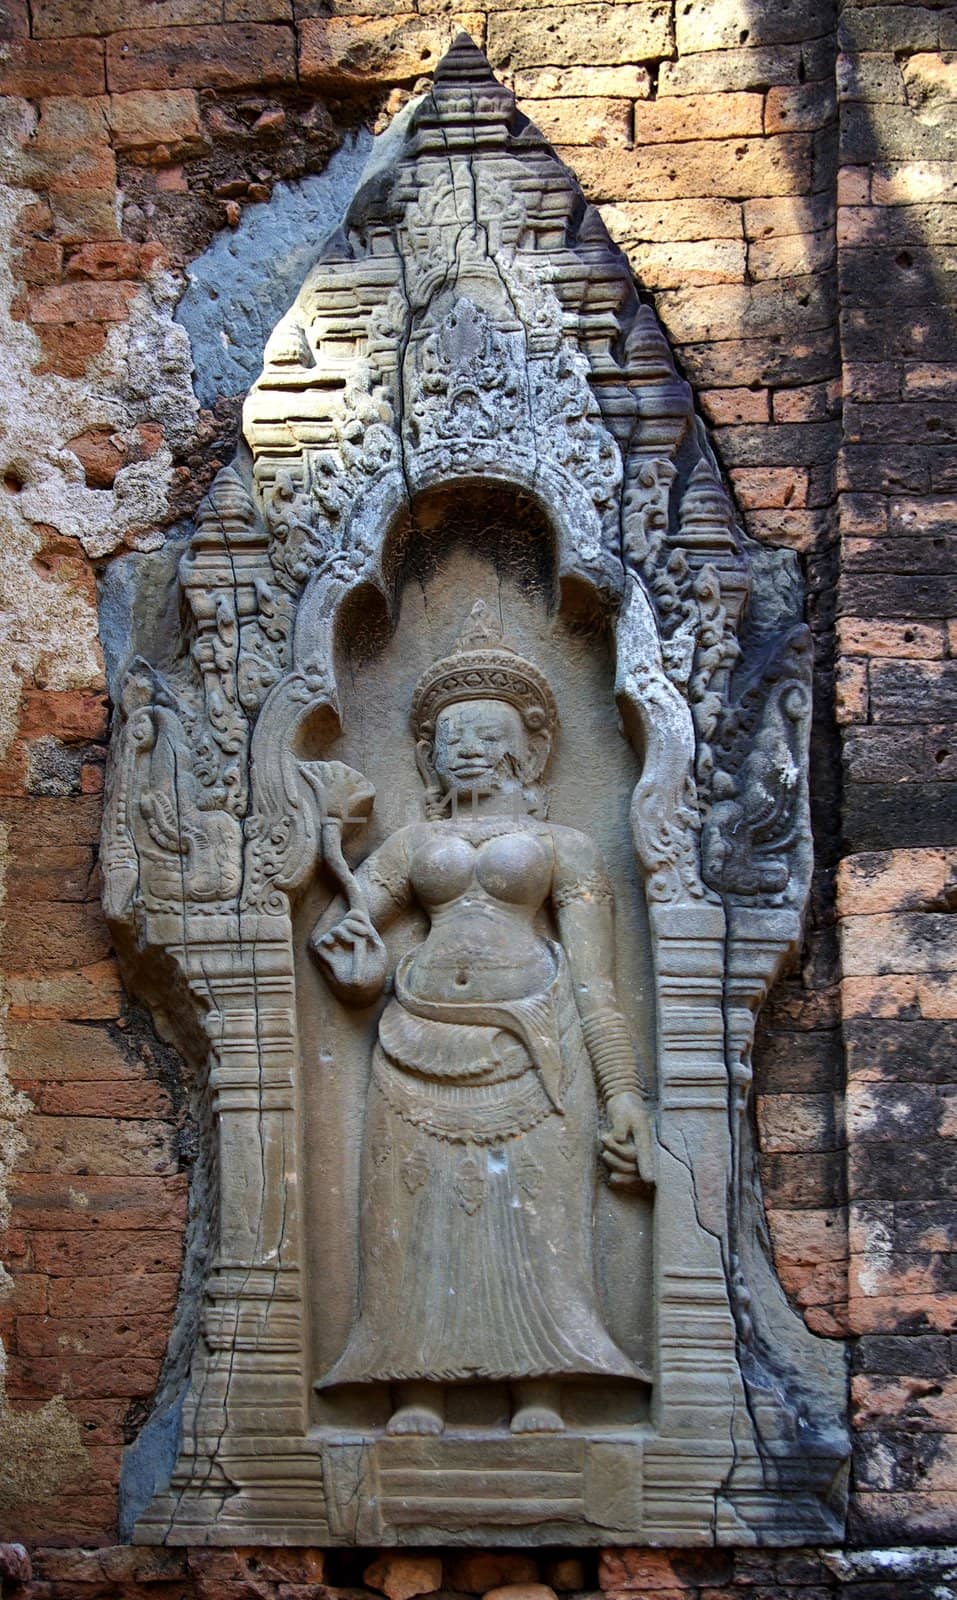 It's a view of one engraved women on a brik wall temple in Angkor